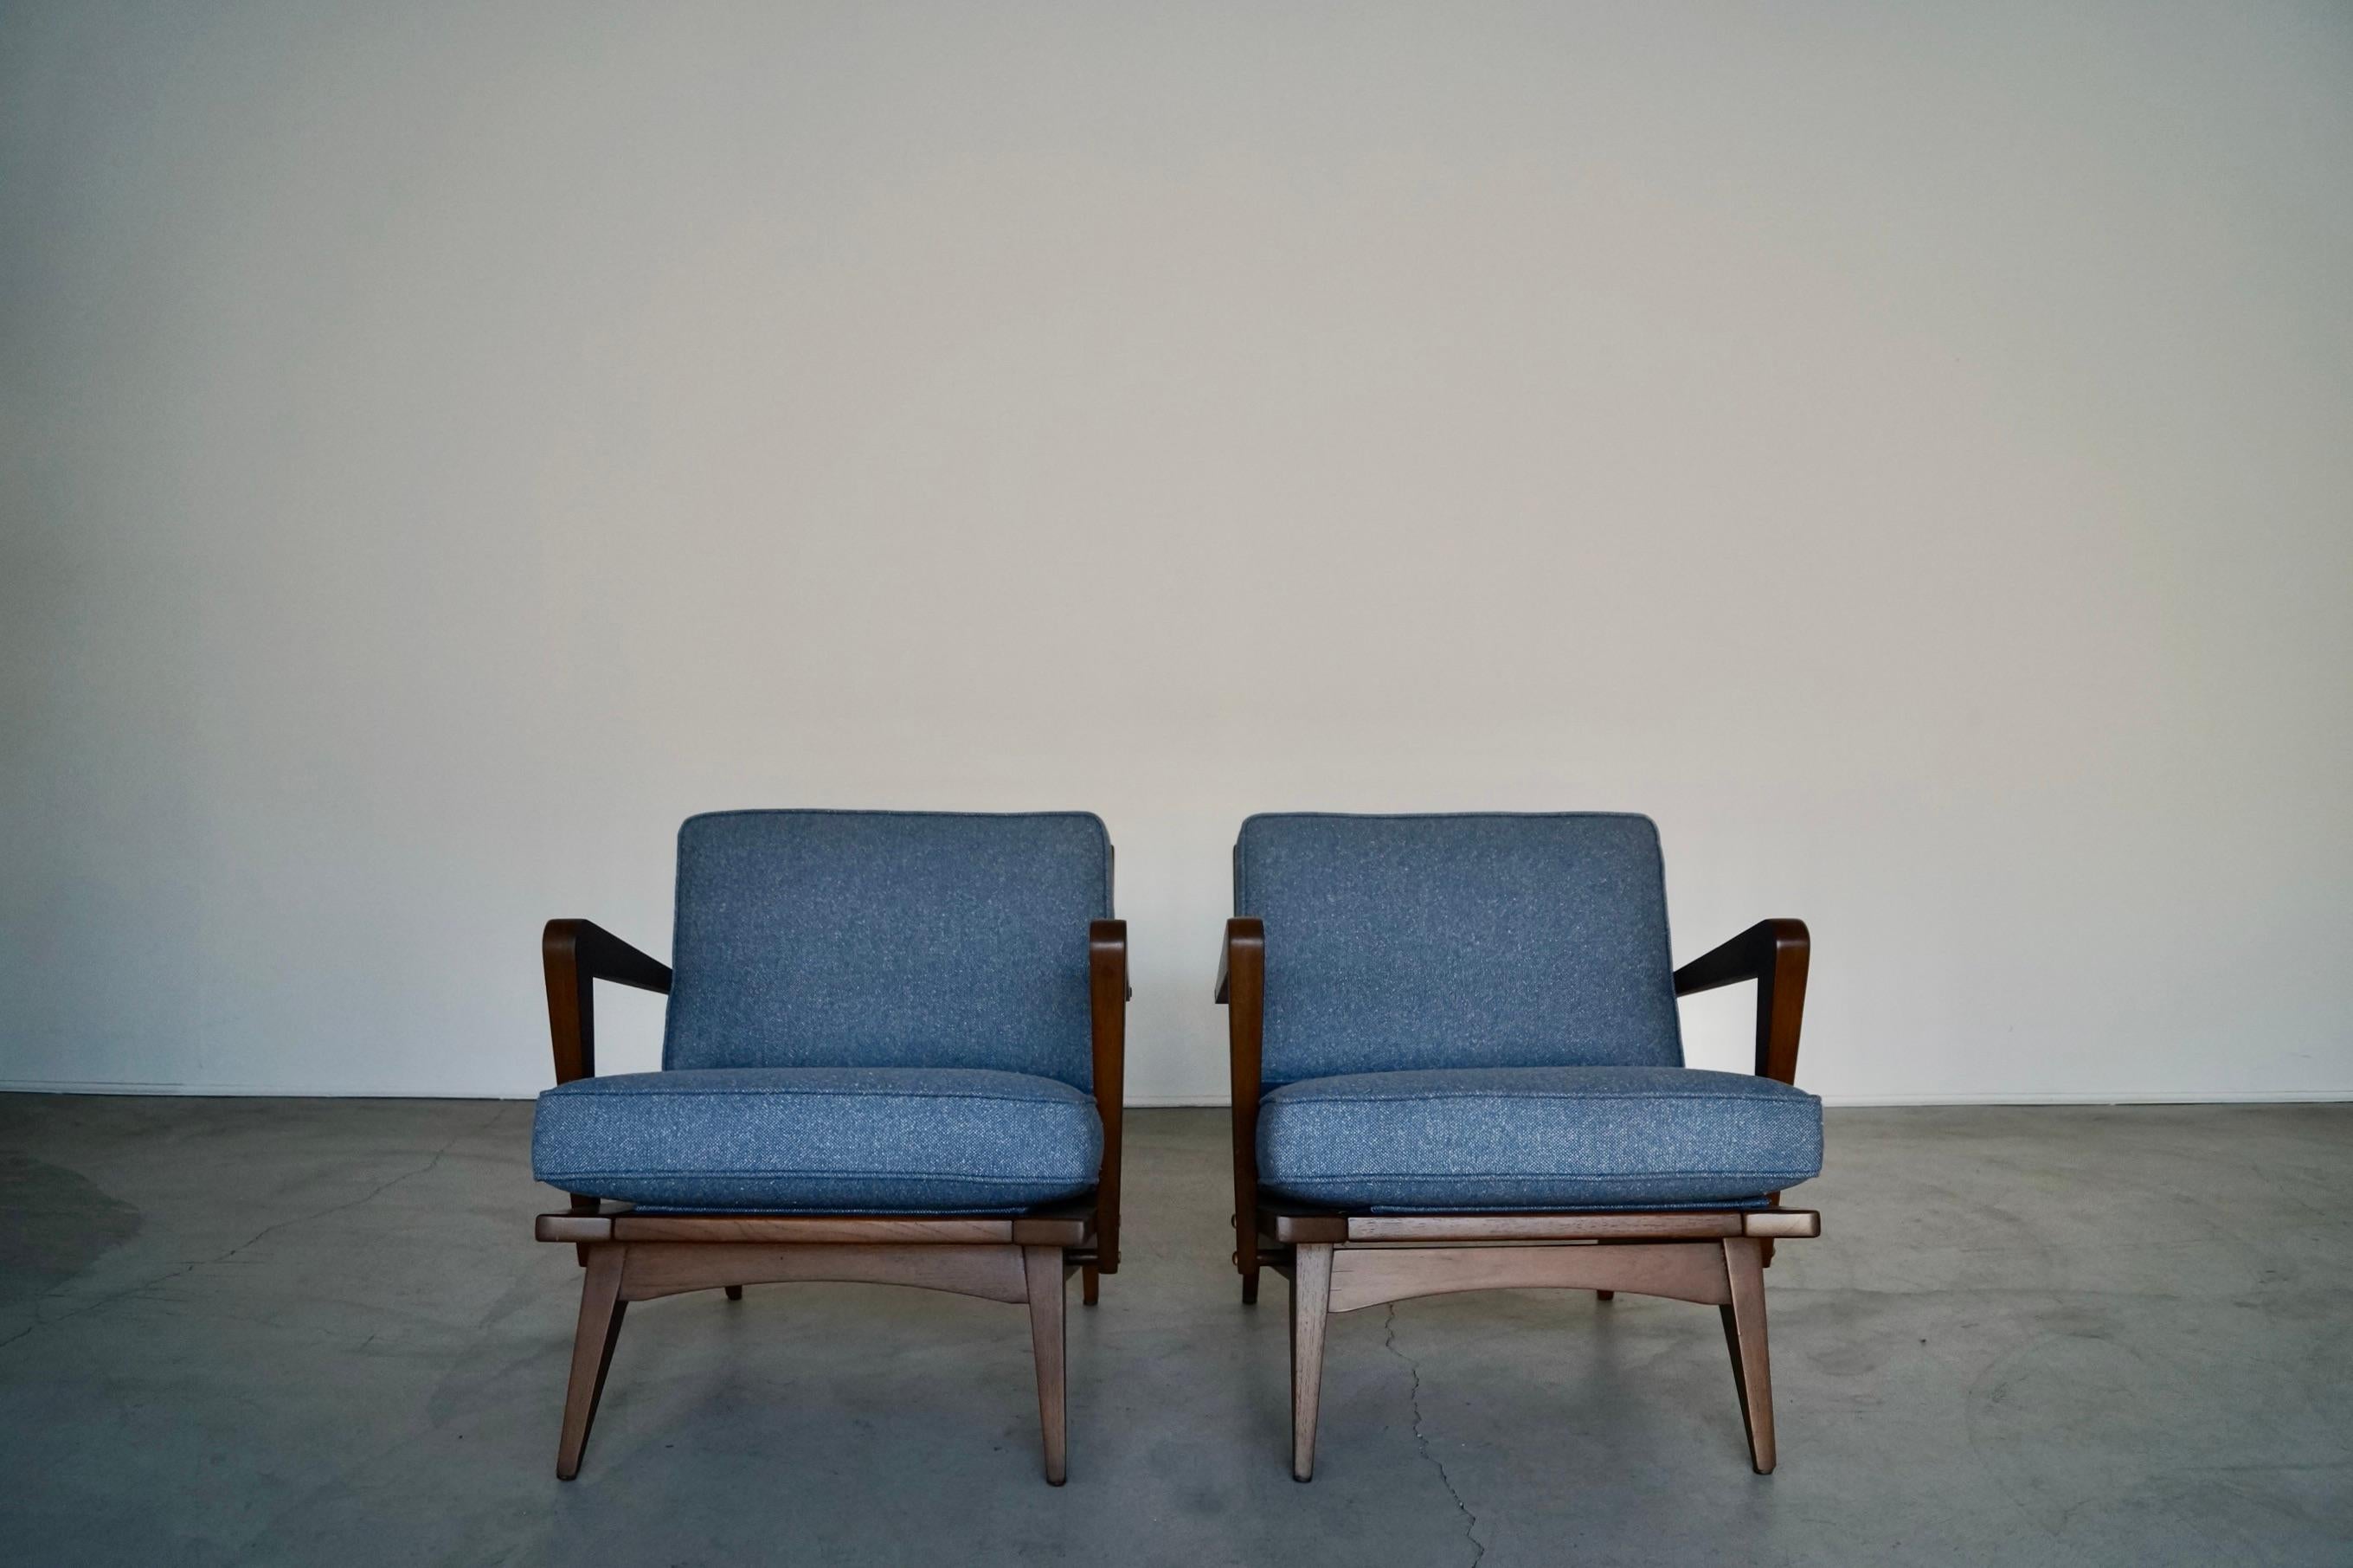 We have this incredible pair of original 1950's Mid-century Modern lounge chairs for sale. They have beautiful Scandinavian lines, and are very rare. The frames have been professionally refinished in walnut, and have new webbing on the seat rests.